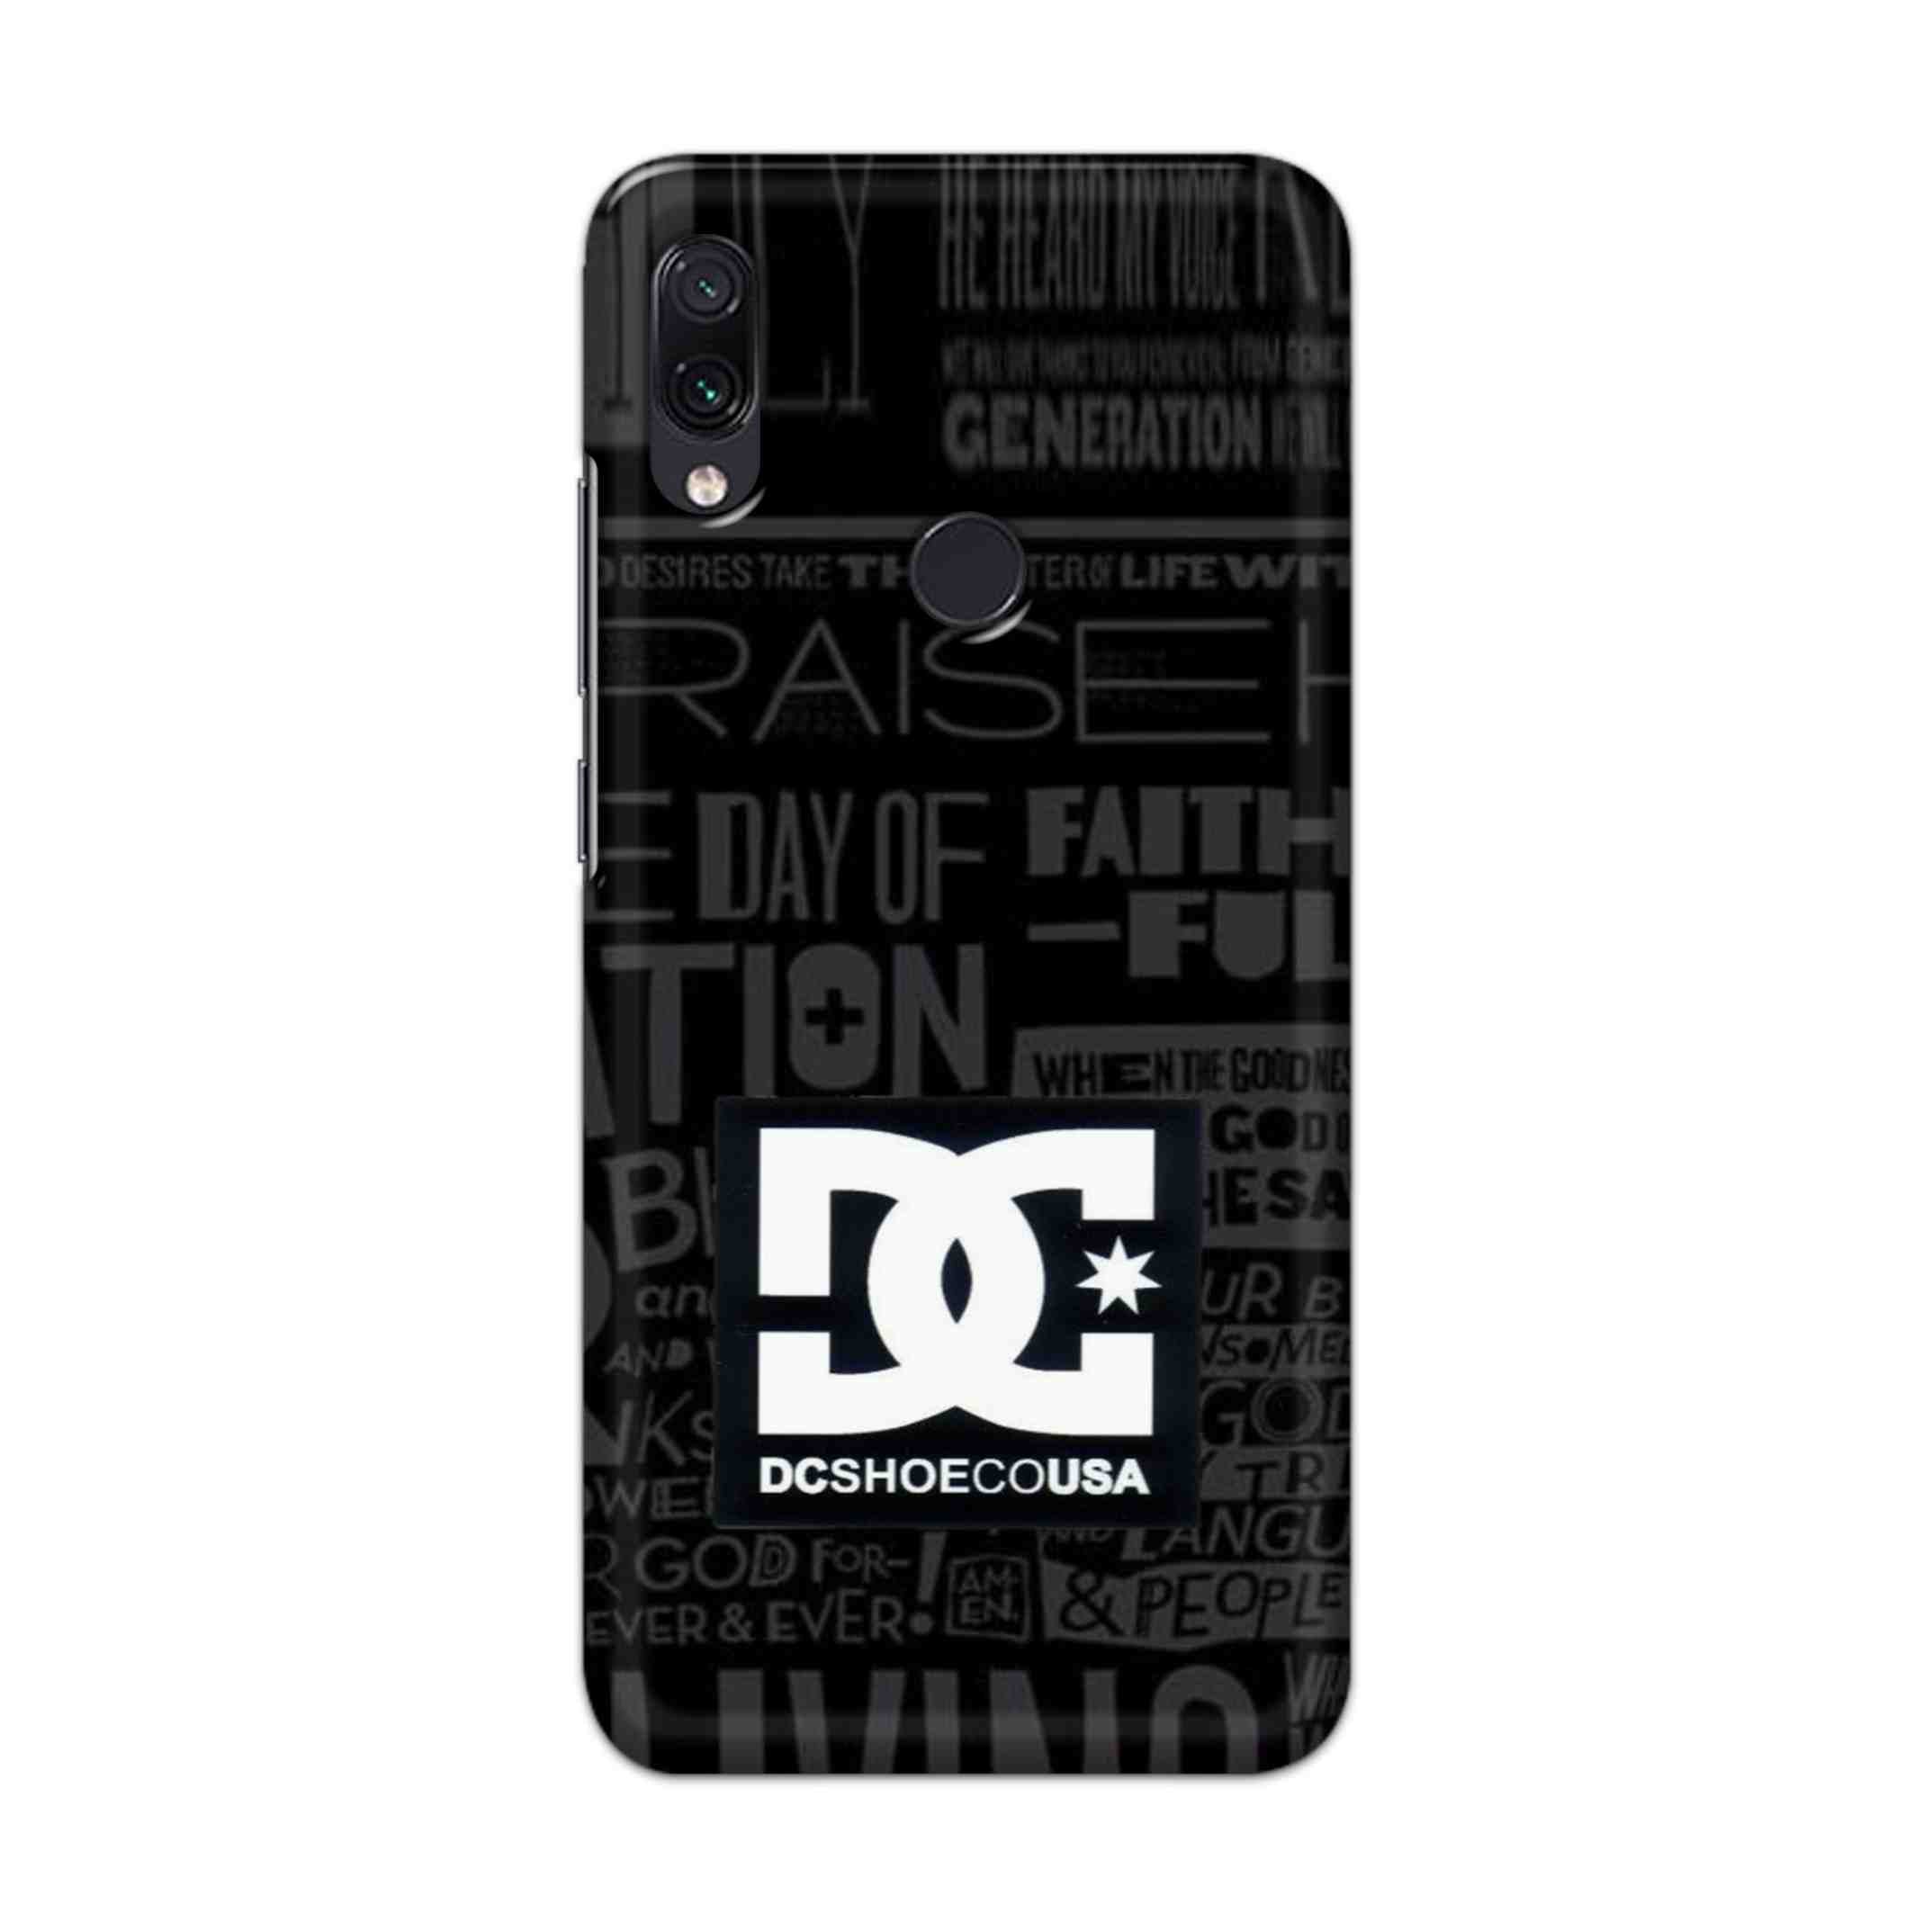 Buy Dc Shoecousa Hard Back Mobile Phone Case Cover For Redmi Note 7 / Note 7 Pro Online